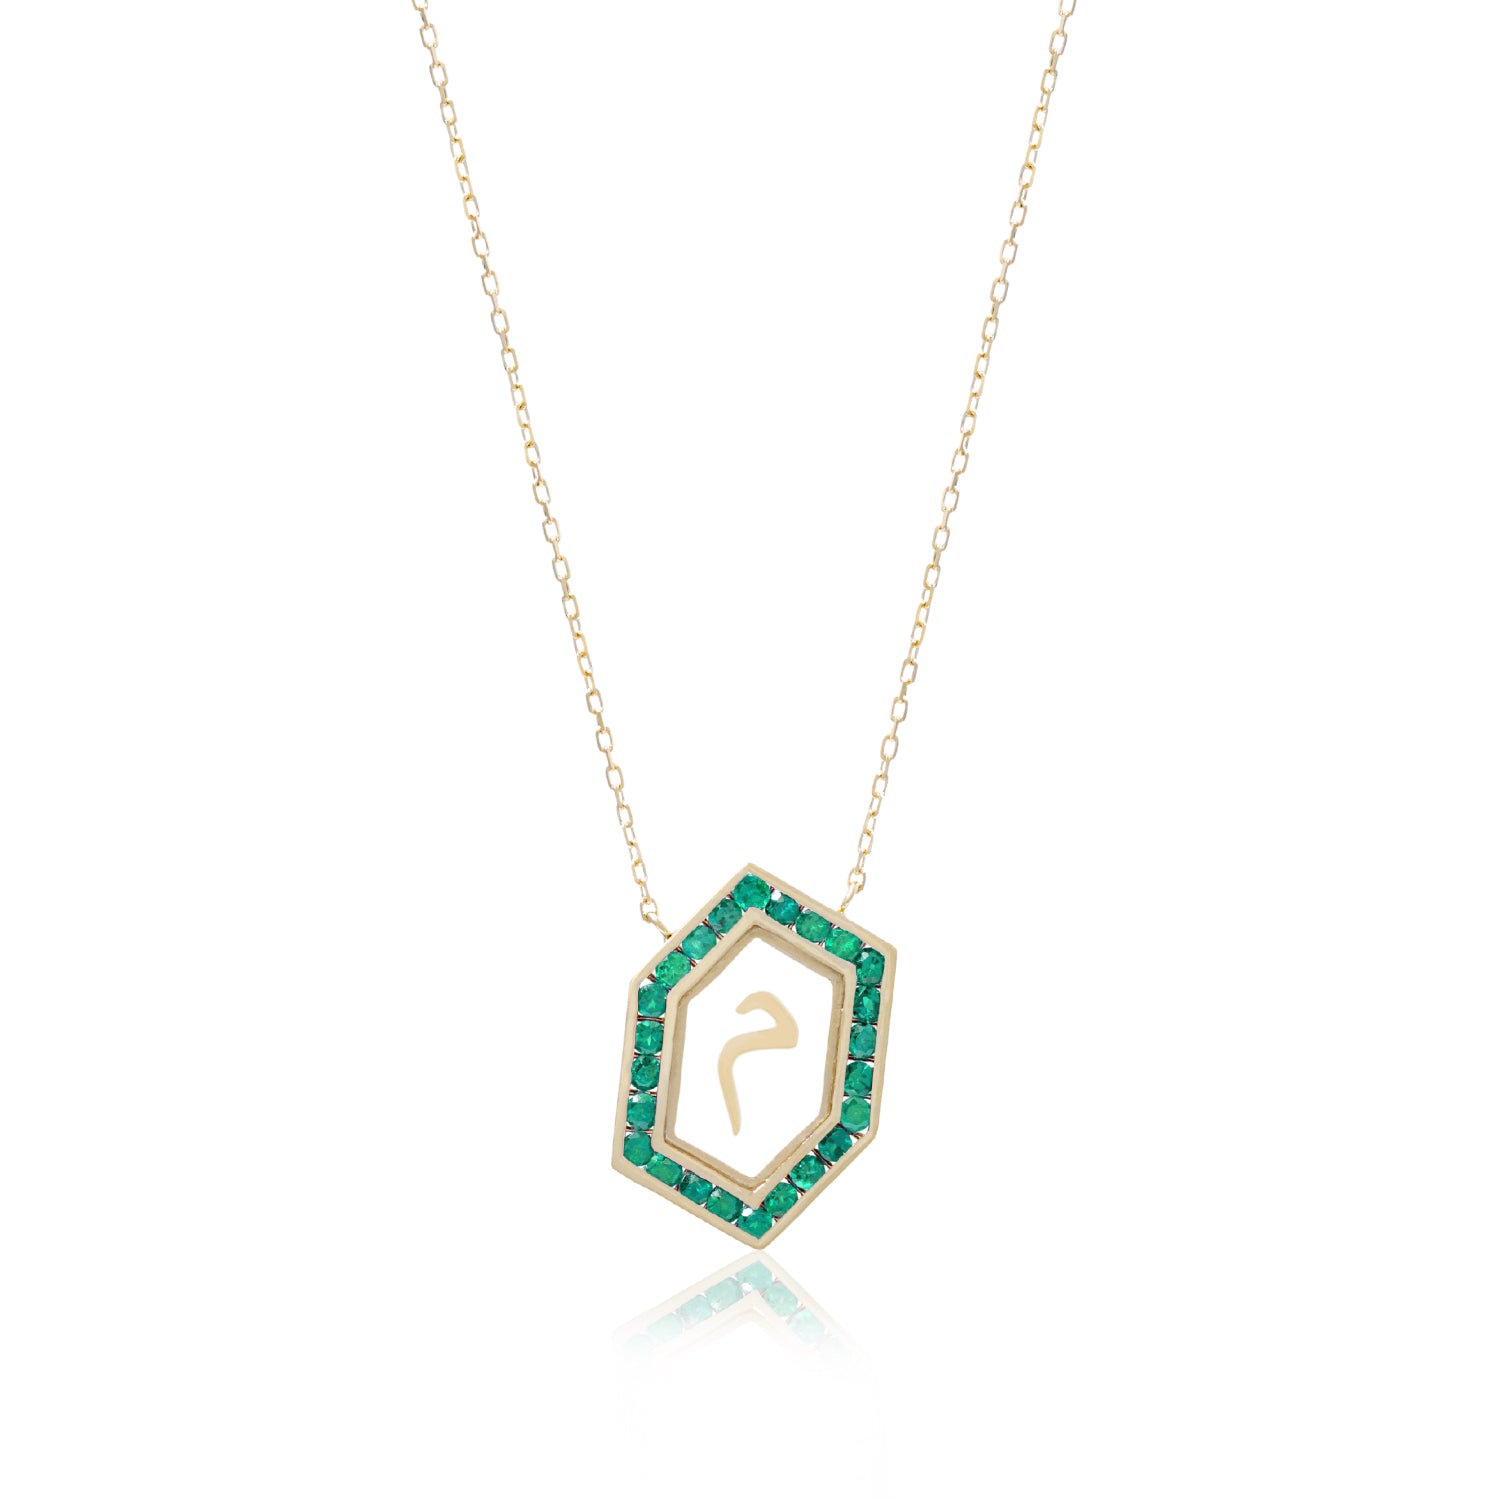 Qamoos 1.0 Letter م Emerald Necklace in Yellow Gold